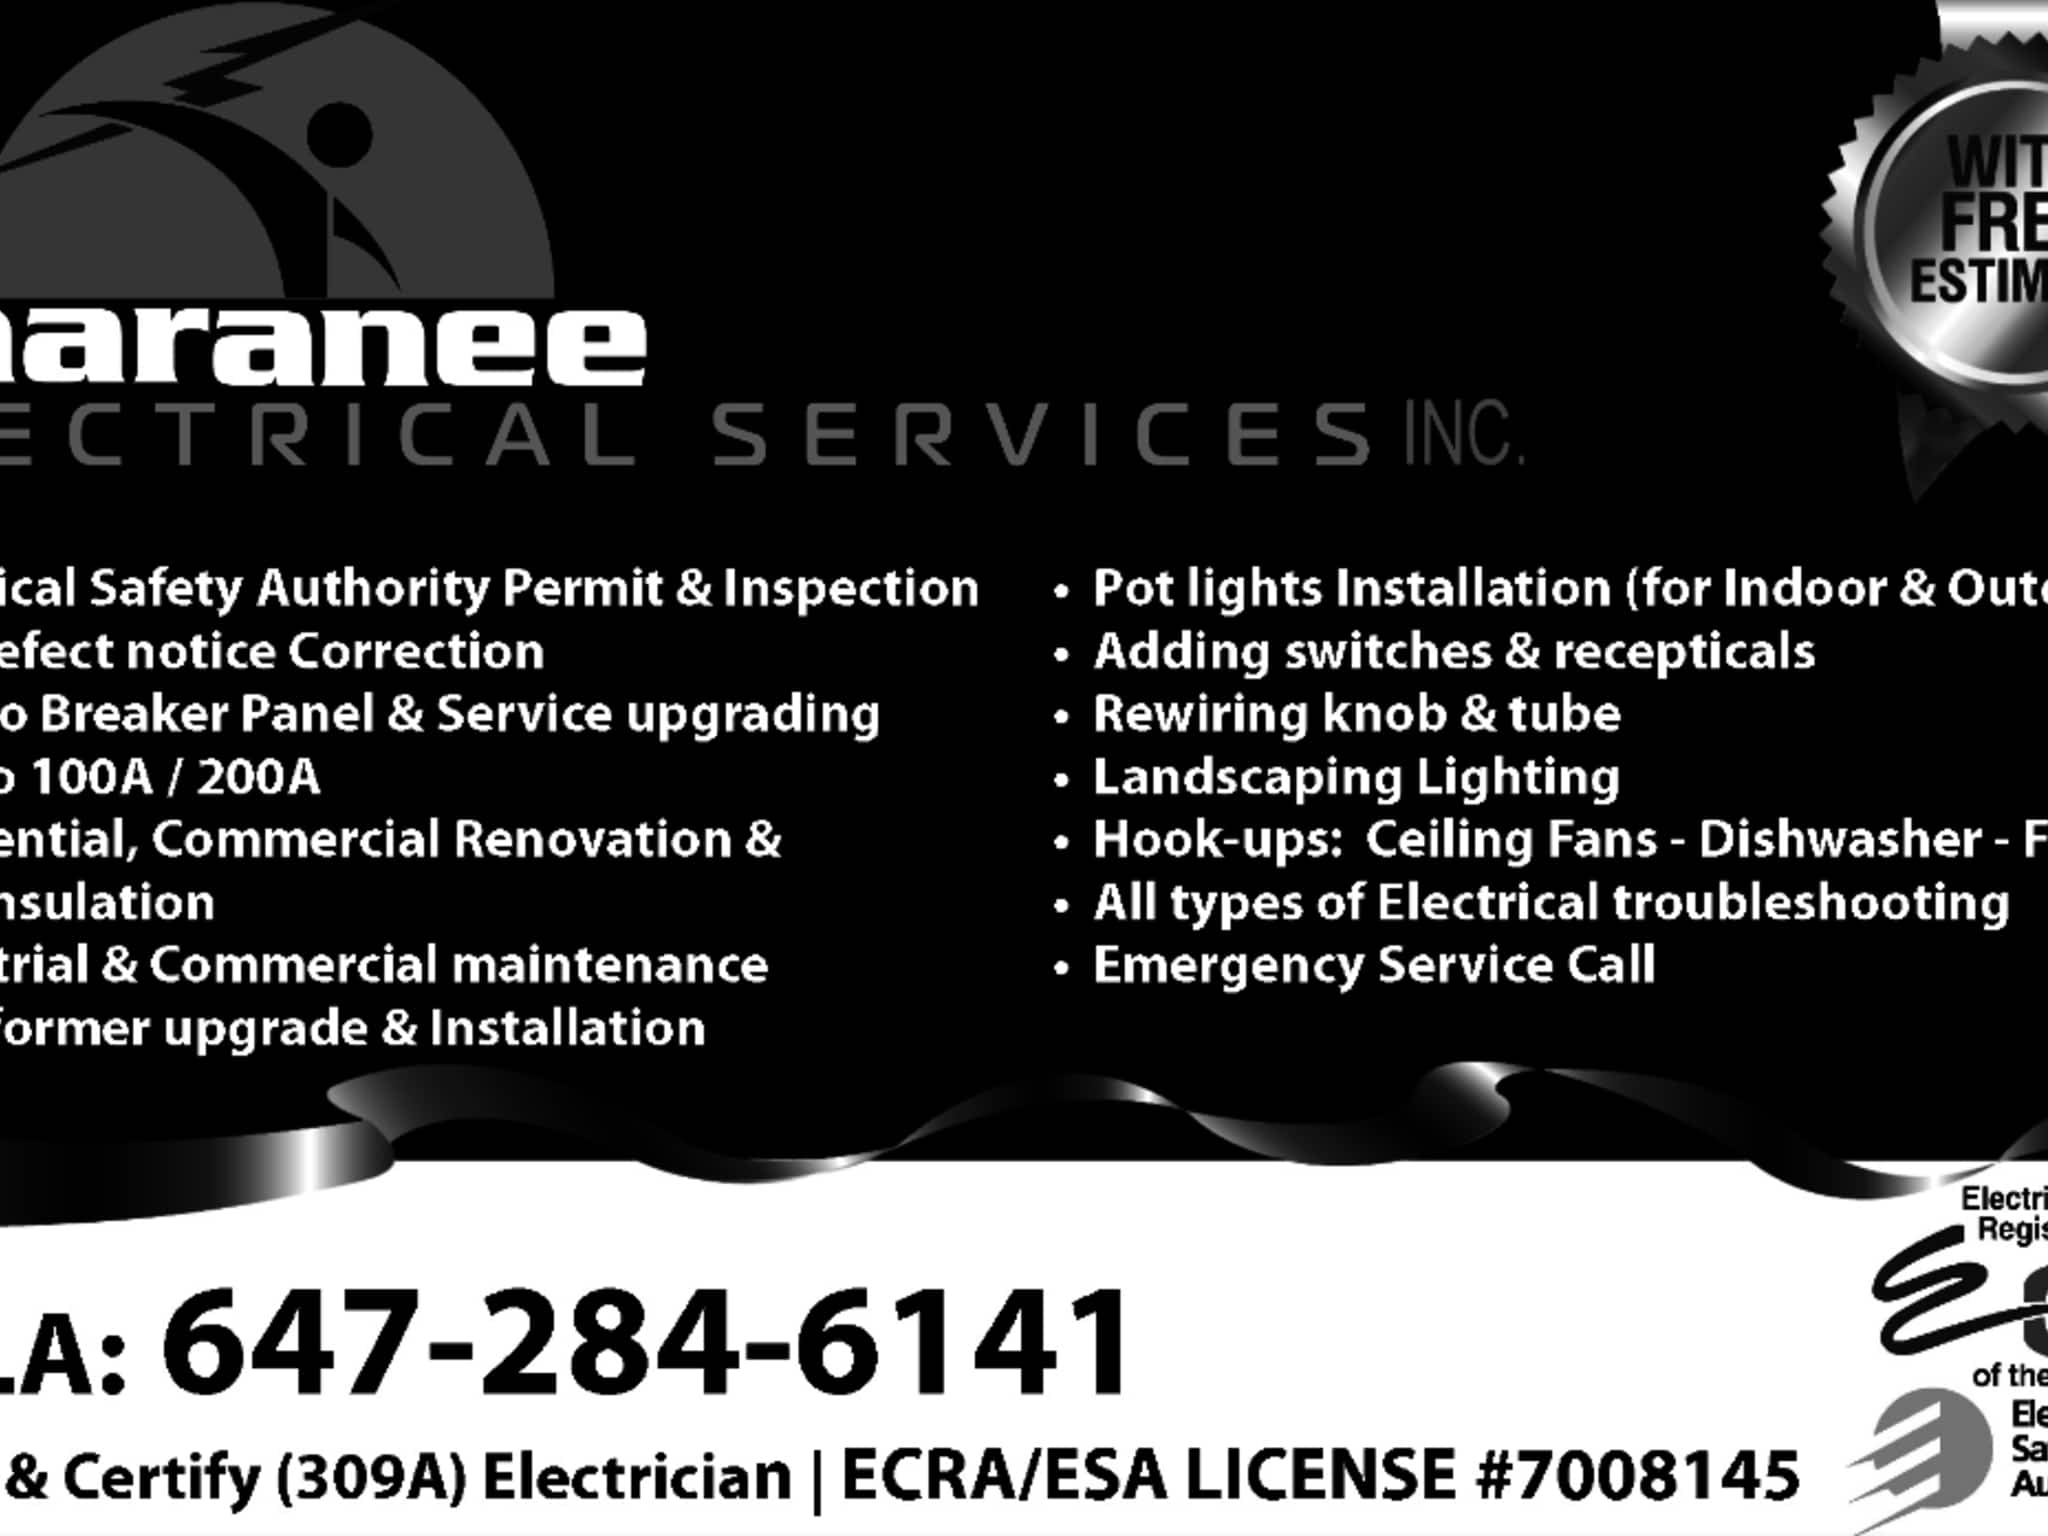 photo Tharanee Electrical Services